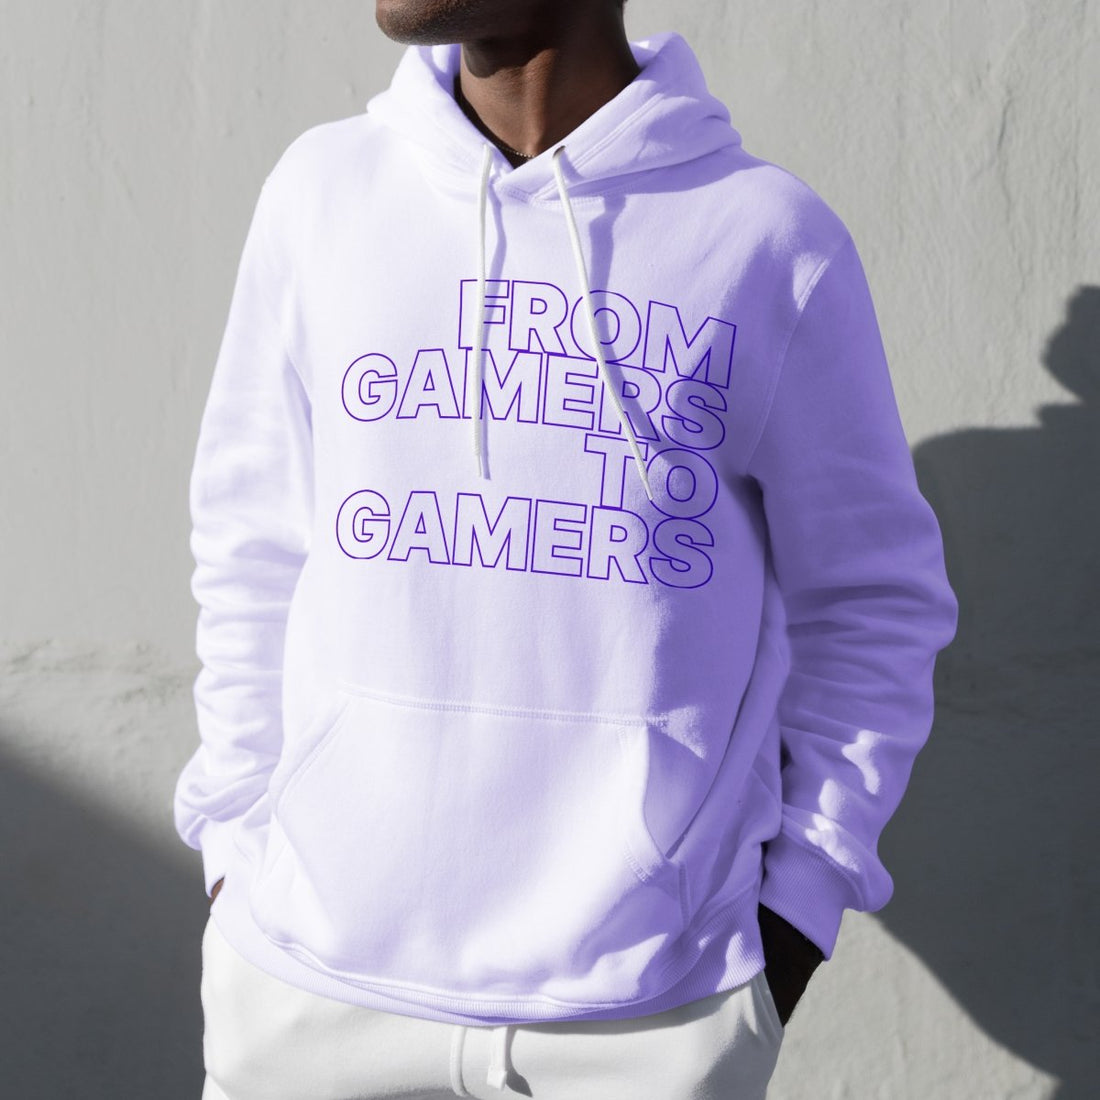 Sudadera con texto "From Gamers To Gamers"